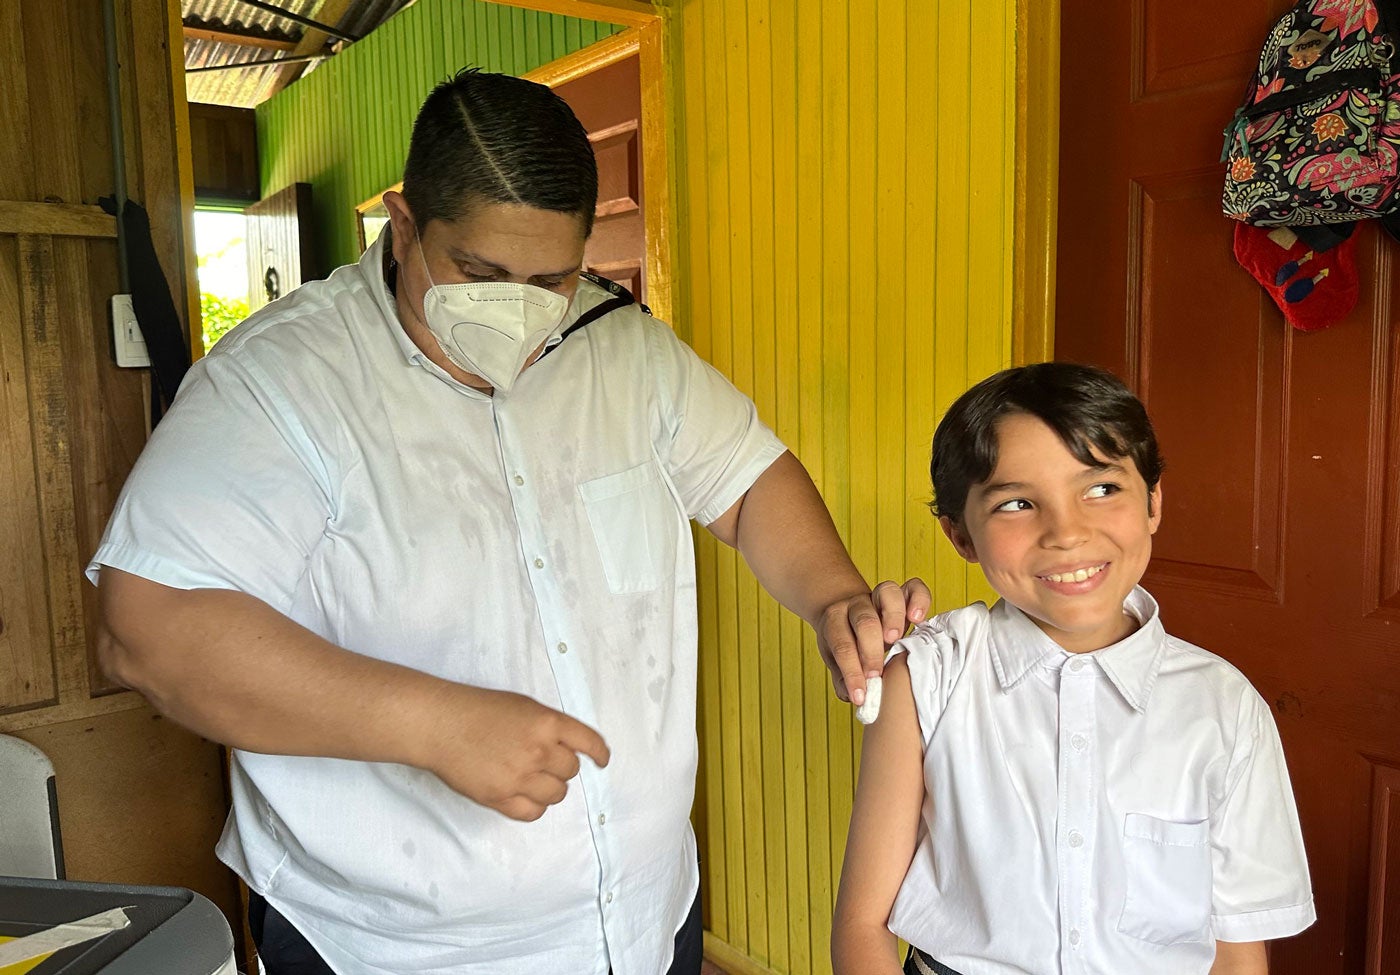 Jacinto Arroyo, primary care technical assistant (PCTA), administers the vaccine.